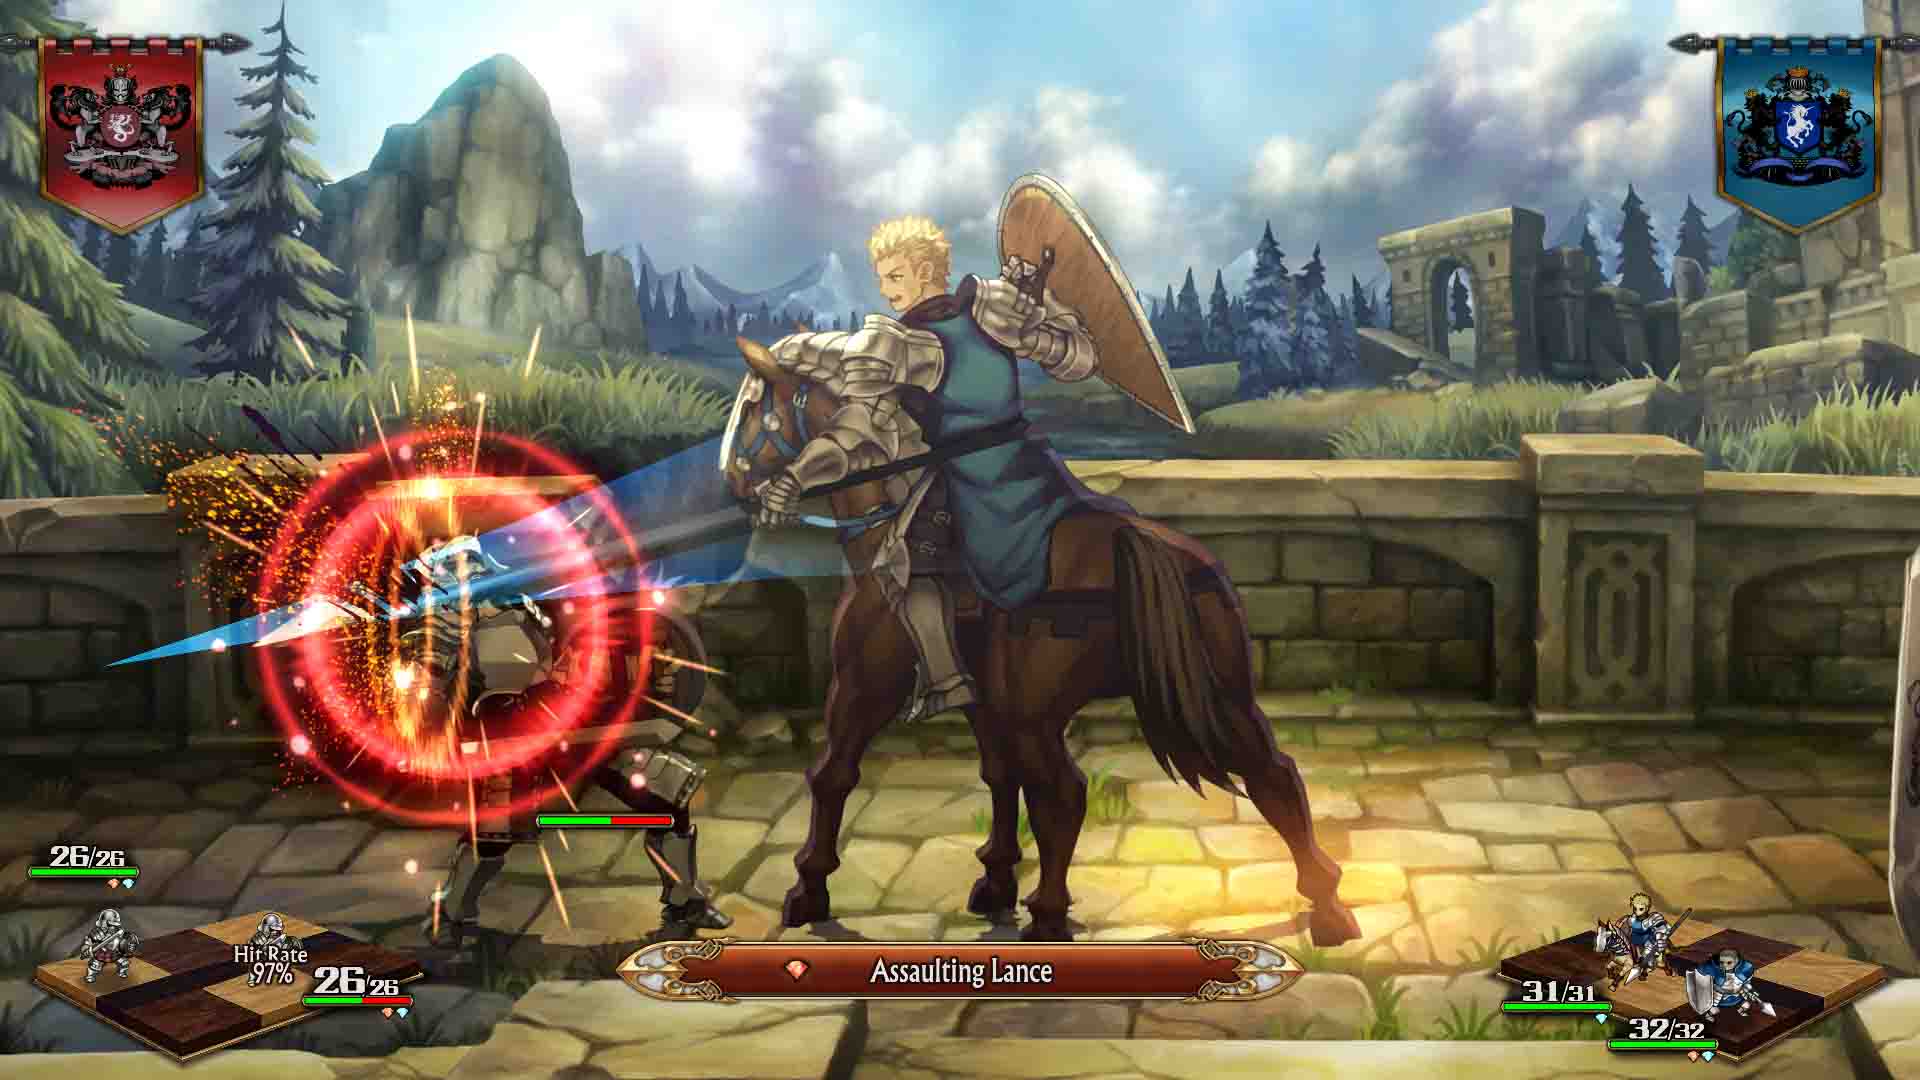 Unicorn Overlord characters, world, and gameplay detailed